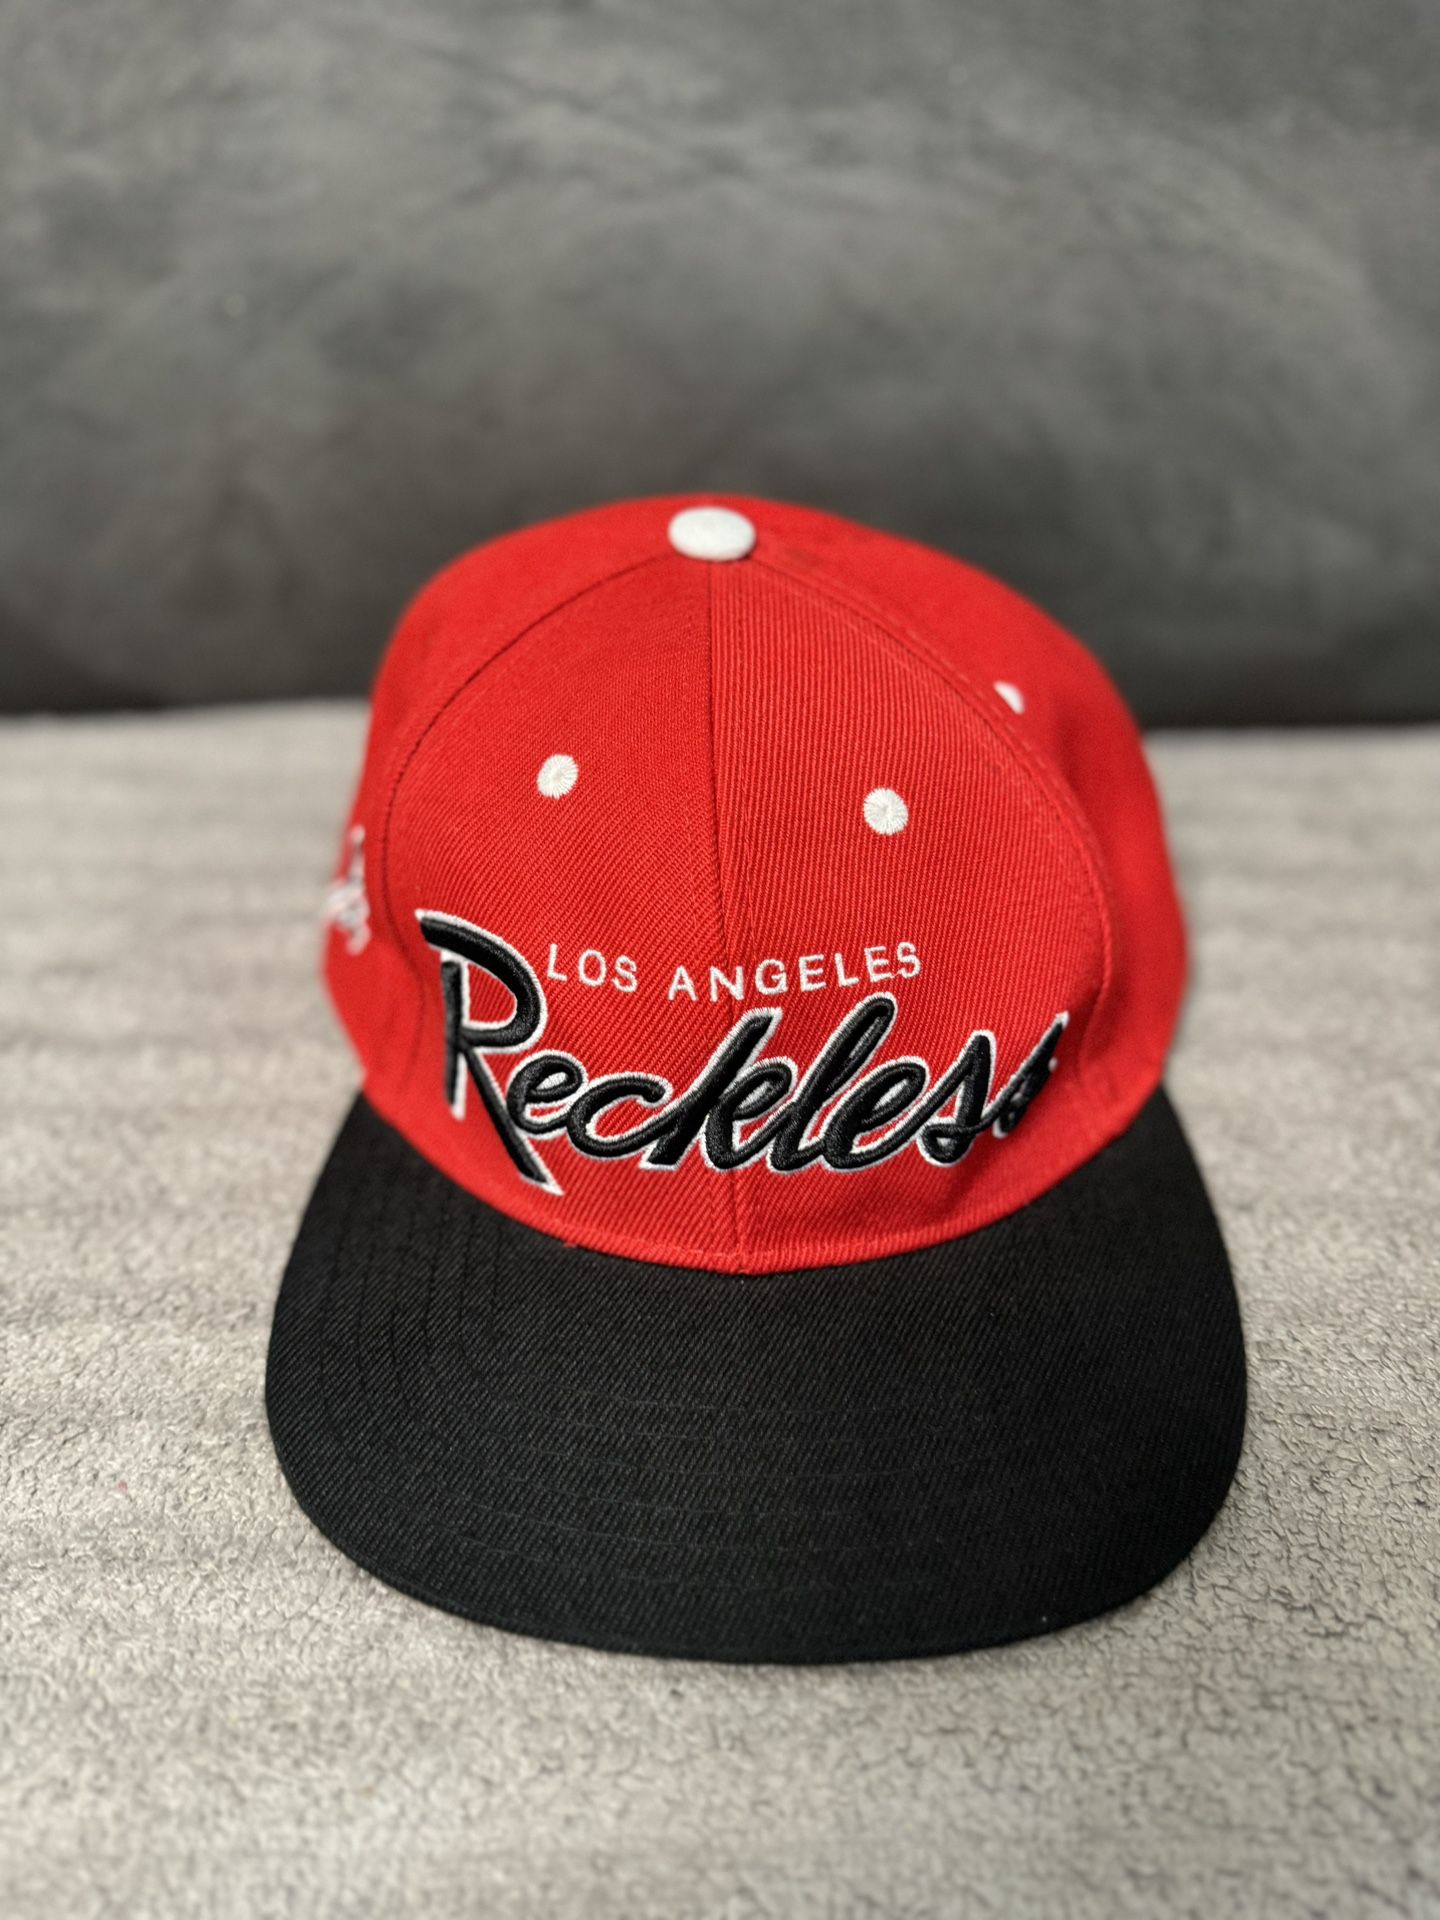 Los Angeles Young & Reckless 90s Chicago bulls mj retro classic Snapback Hat Cap